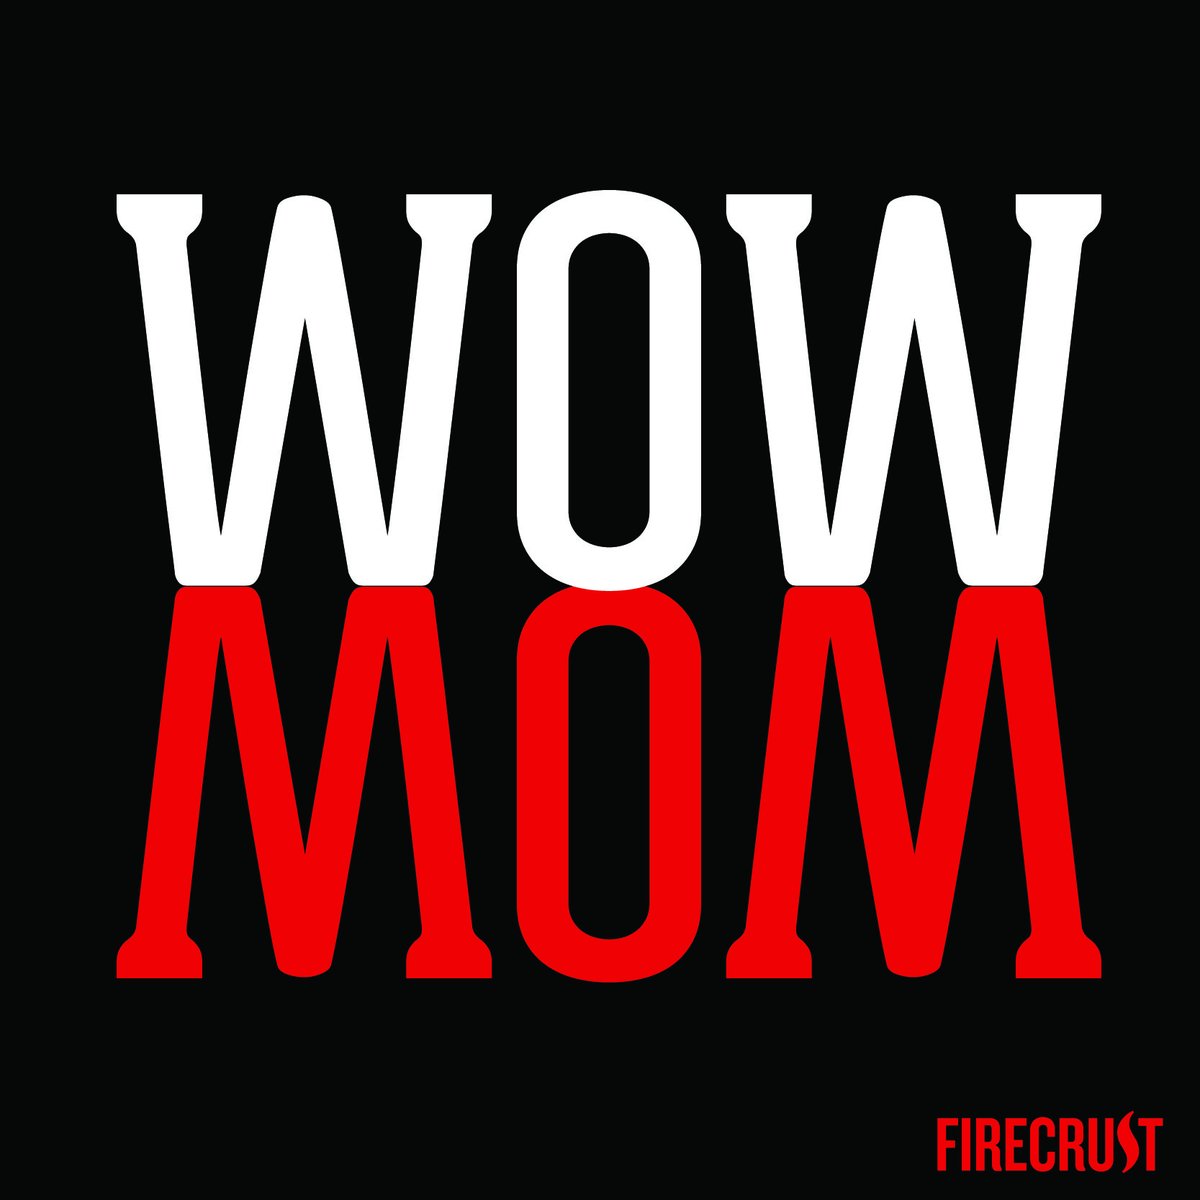 The one word that describes Mom the best, wow! Happy Mother's Day to all the moms out there! ❤️ . . . . #firecrust #custompizza #customsalad #custompasta #premiumtoppings #neapolitanpizza #ilovepizza #bestpizza #instagood #pizzalove #yummy #foodie #amazing #wherevancouver